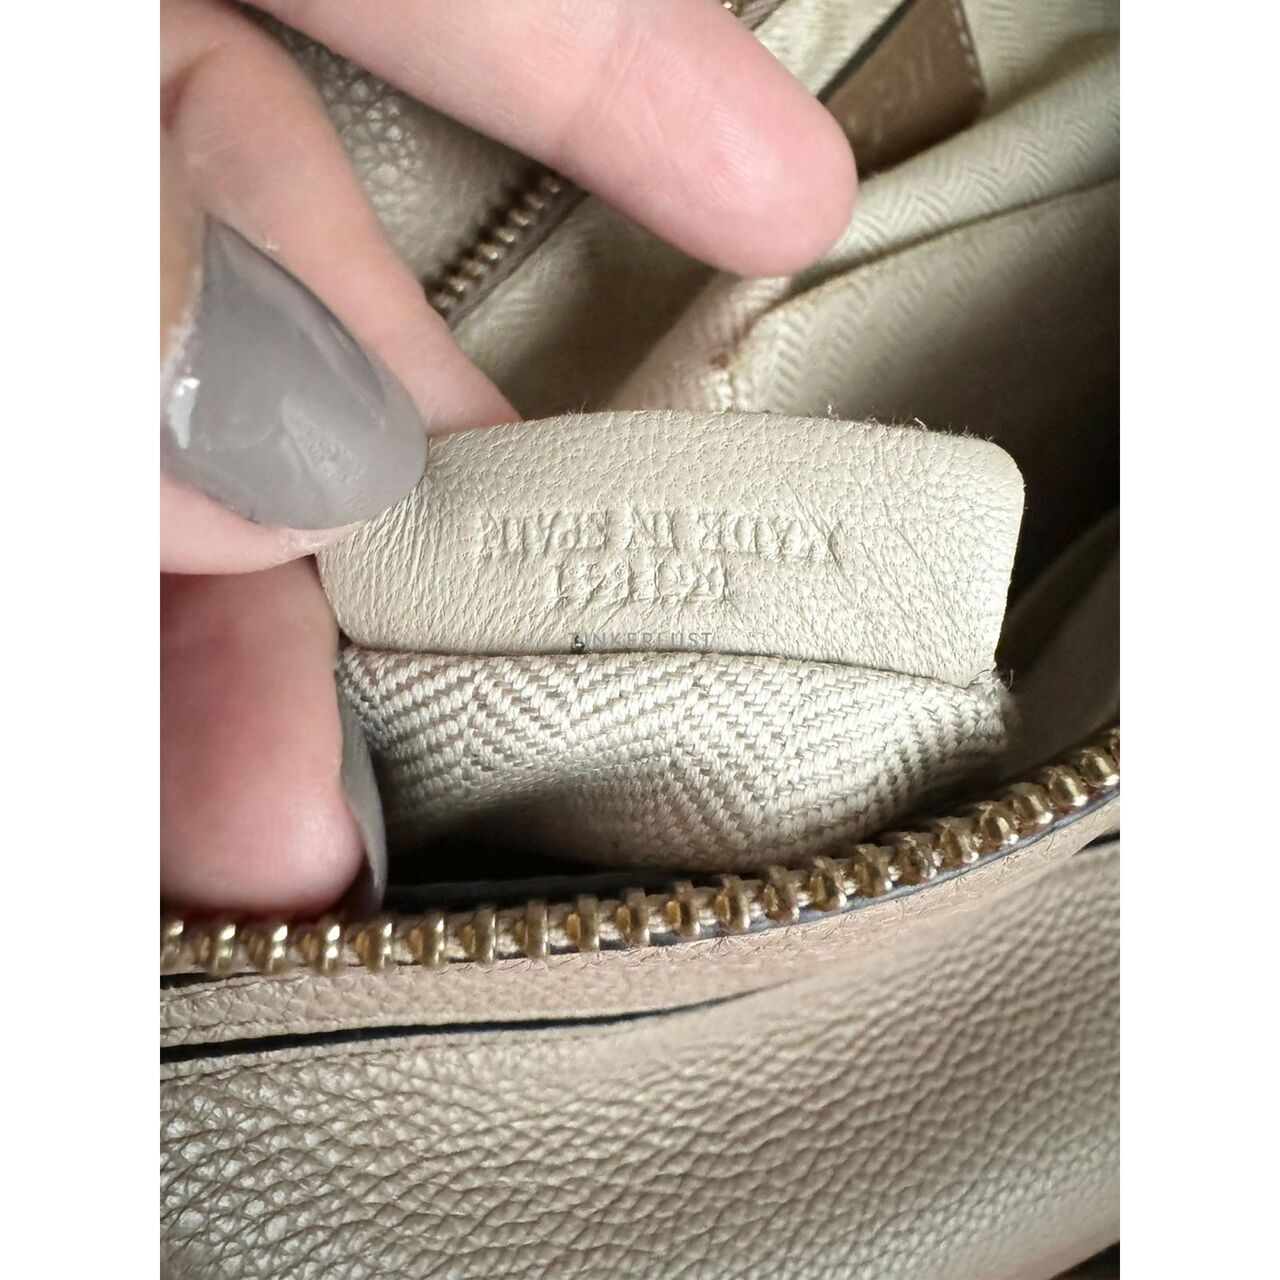 Loewe Puzzle Small Taupe Grained Leather 2018 Satchel